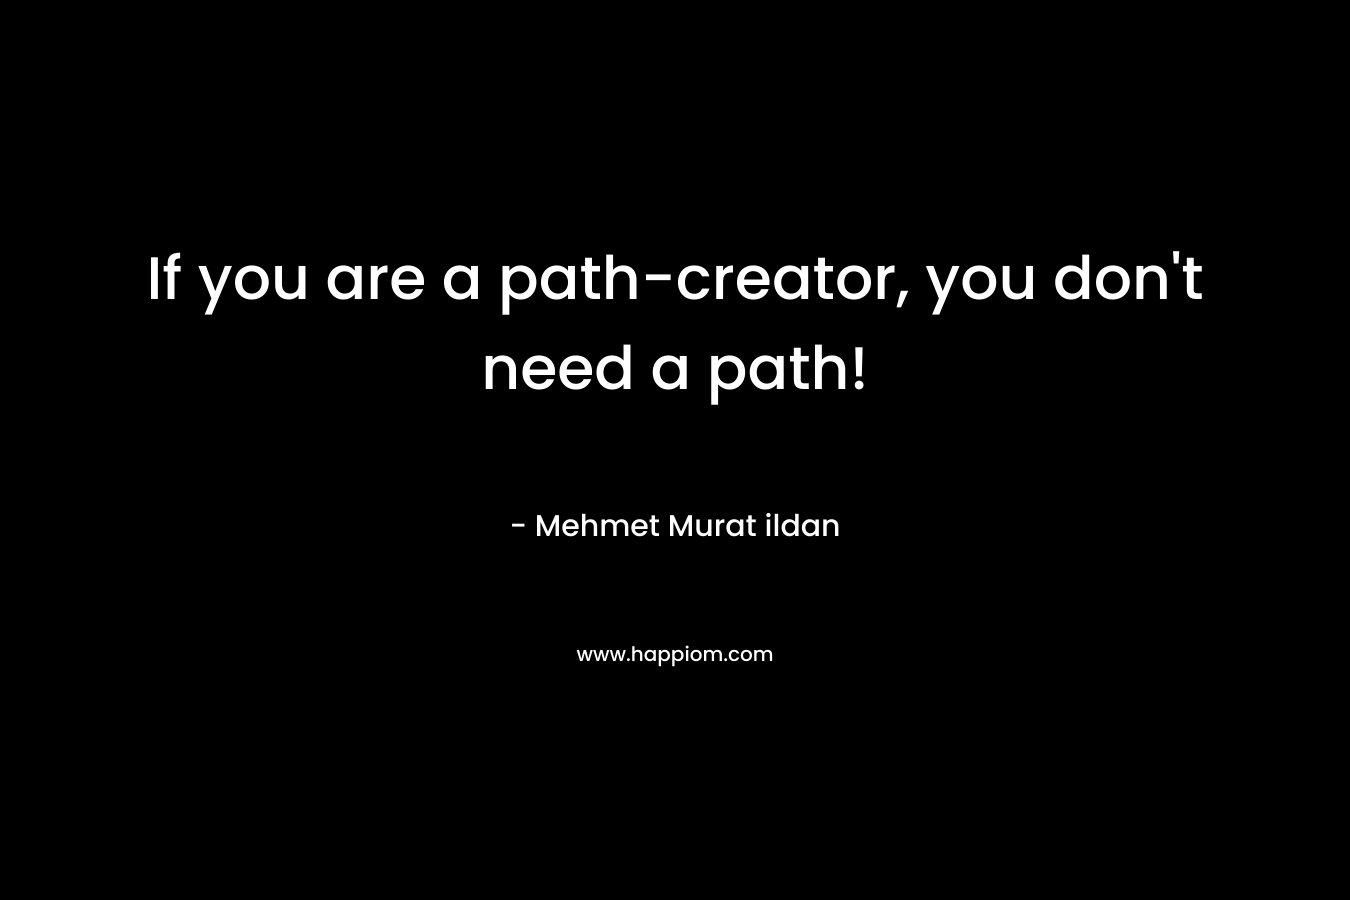 If you are a path-creator, you don't need a path!